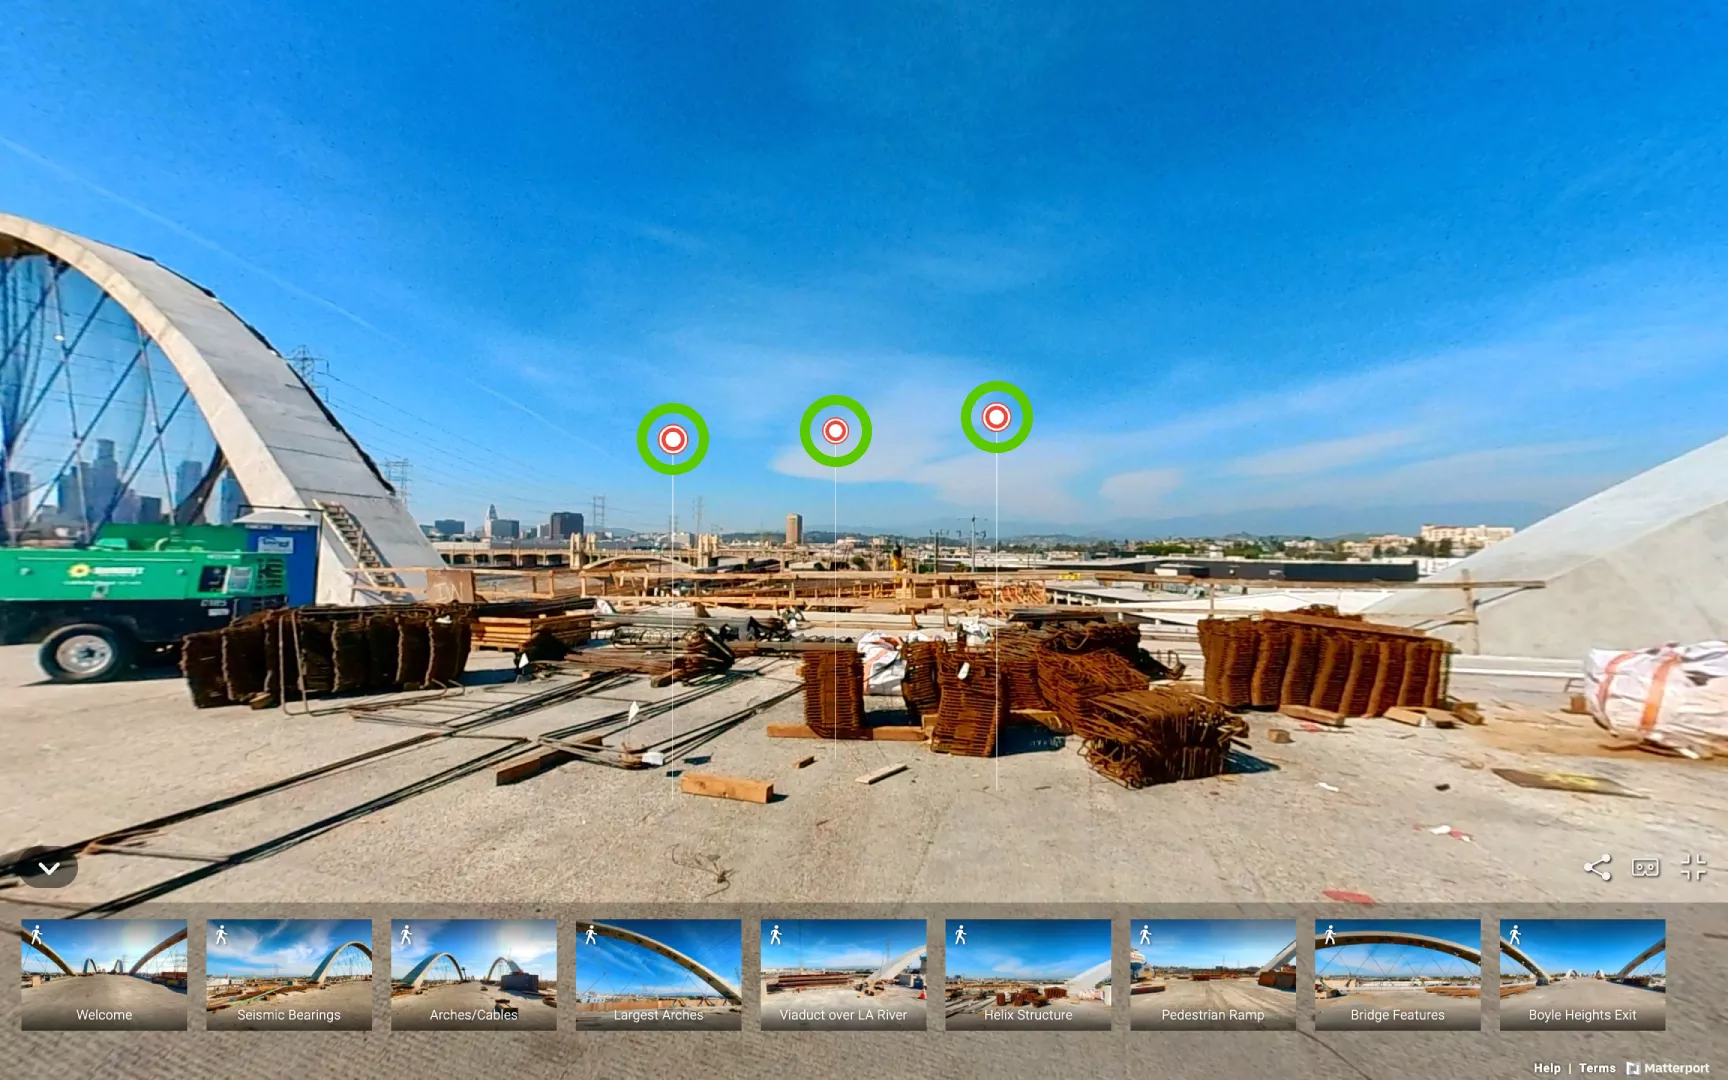 A view of the pins in the 3D virtual tour